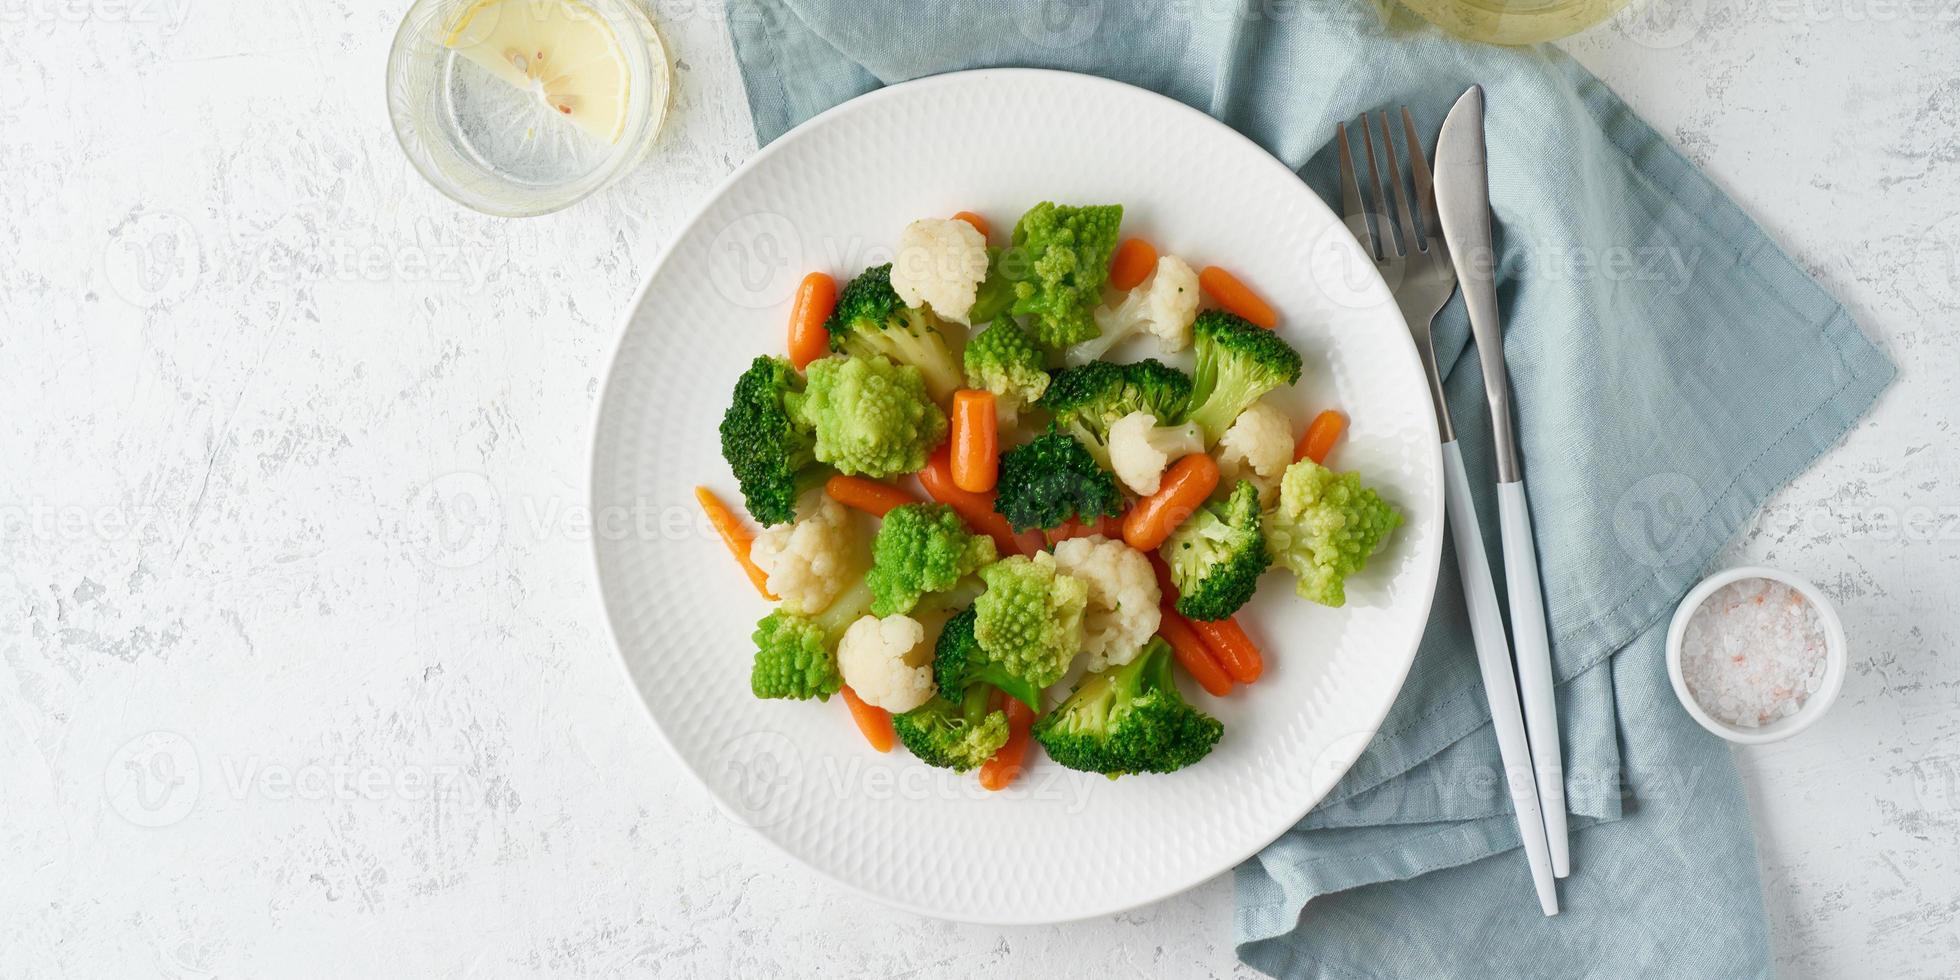 Mix of boiled vegetables. Broccoli, carrots, cauliflower. Steamed vegetables for low-calorie diet photo